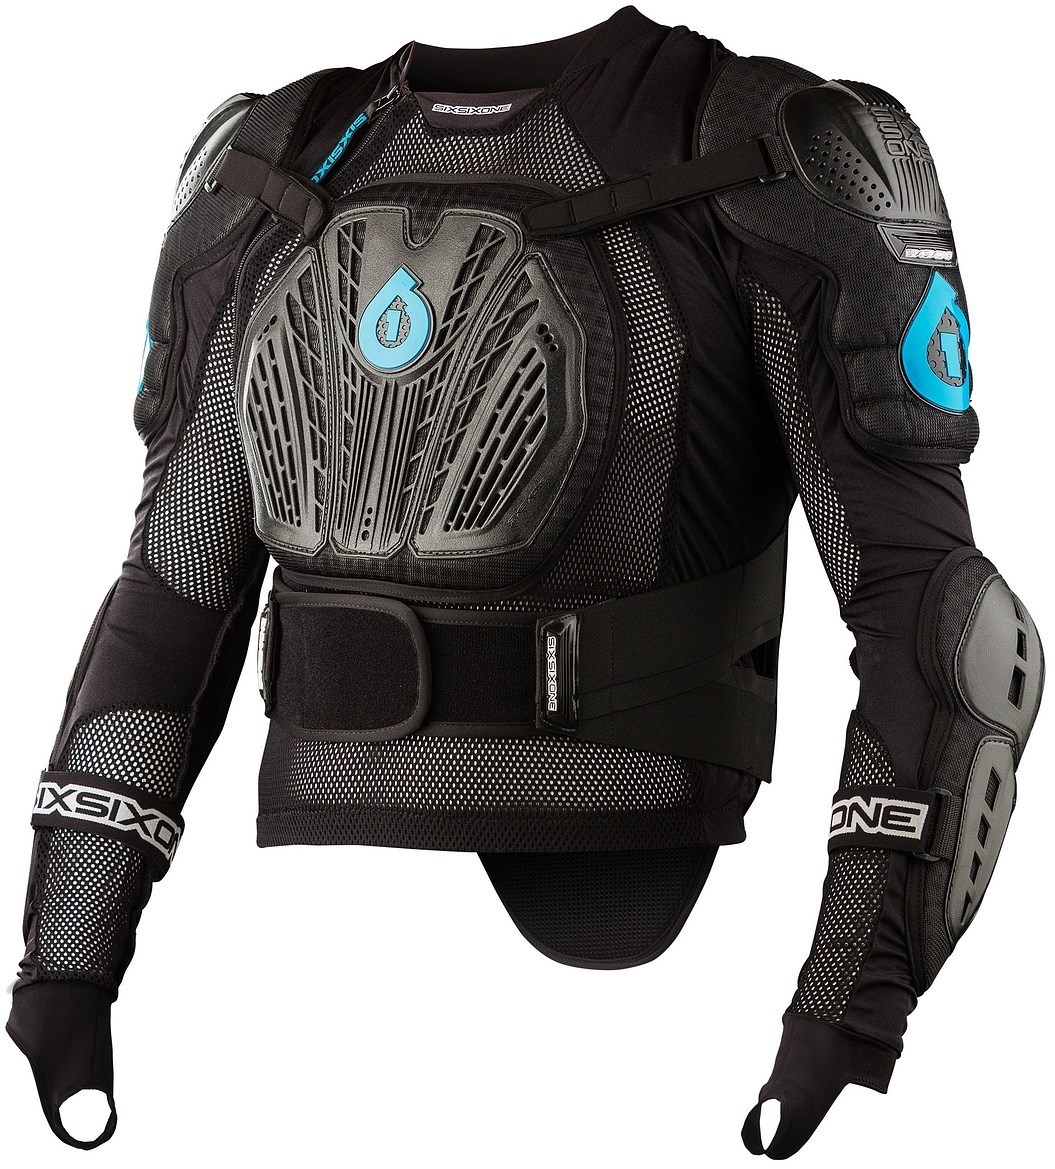 SixSixOne 661 Rage Pressure Suit - Body Armour product image